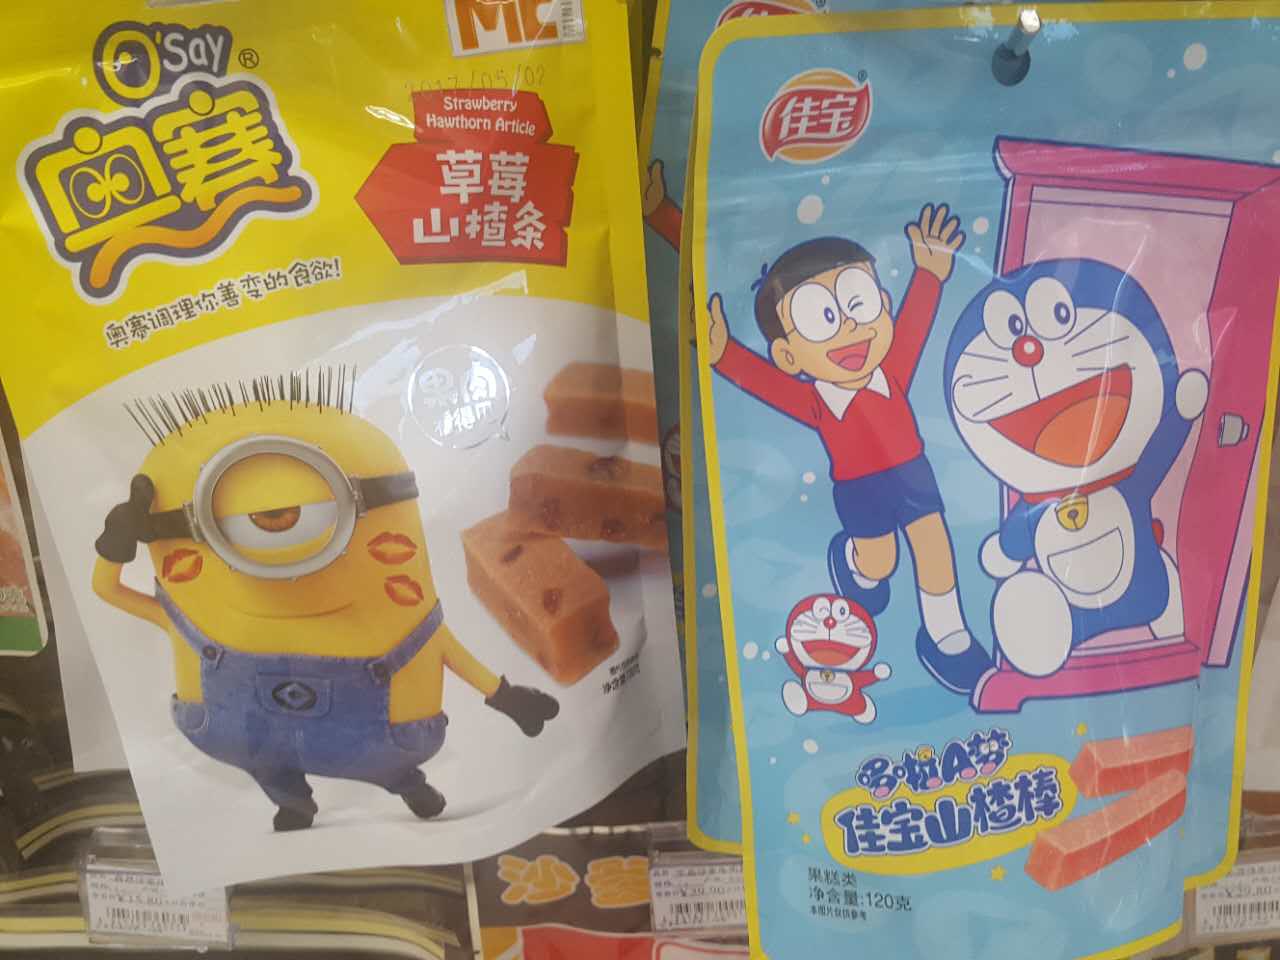 Keep an eye on the kid’s sector: Snacking among Chinese children